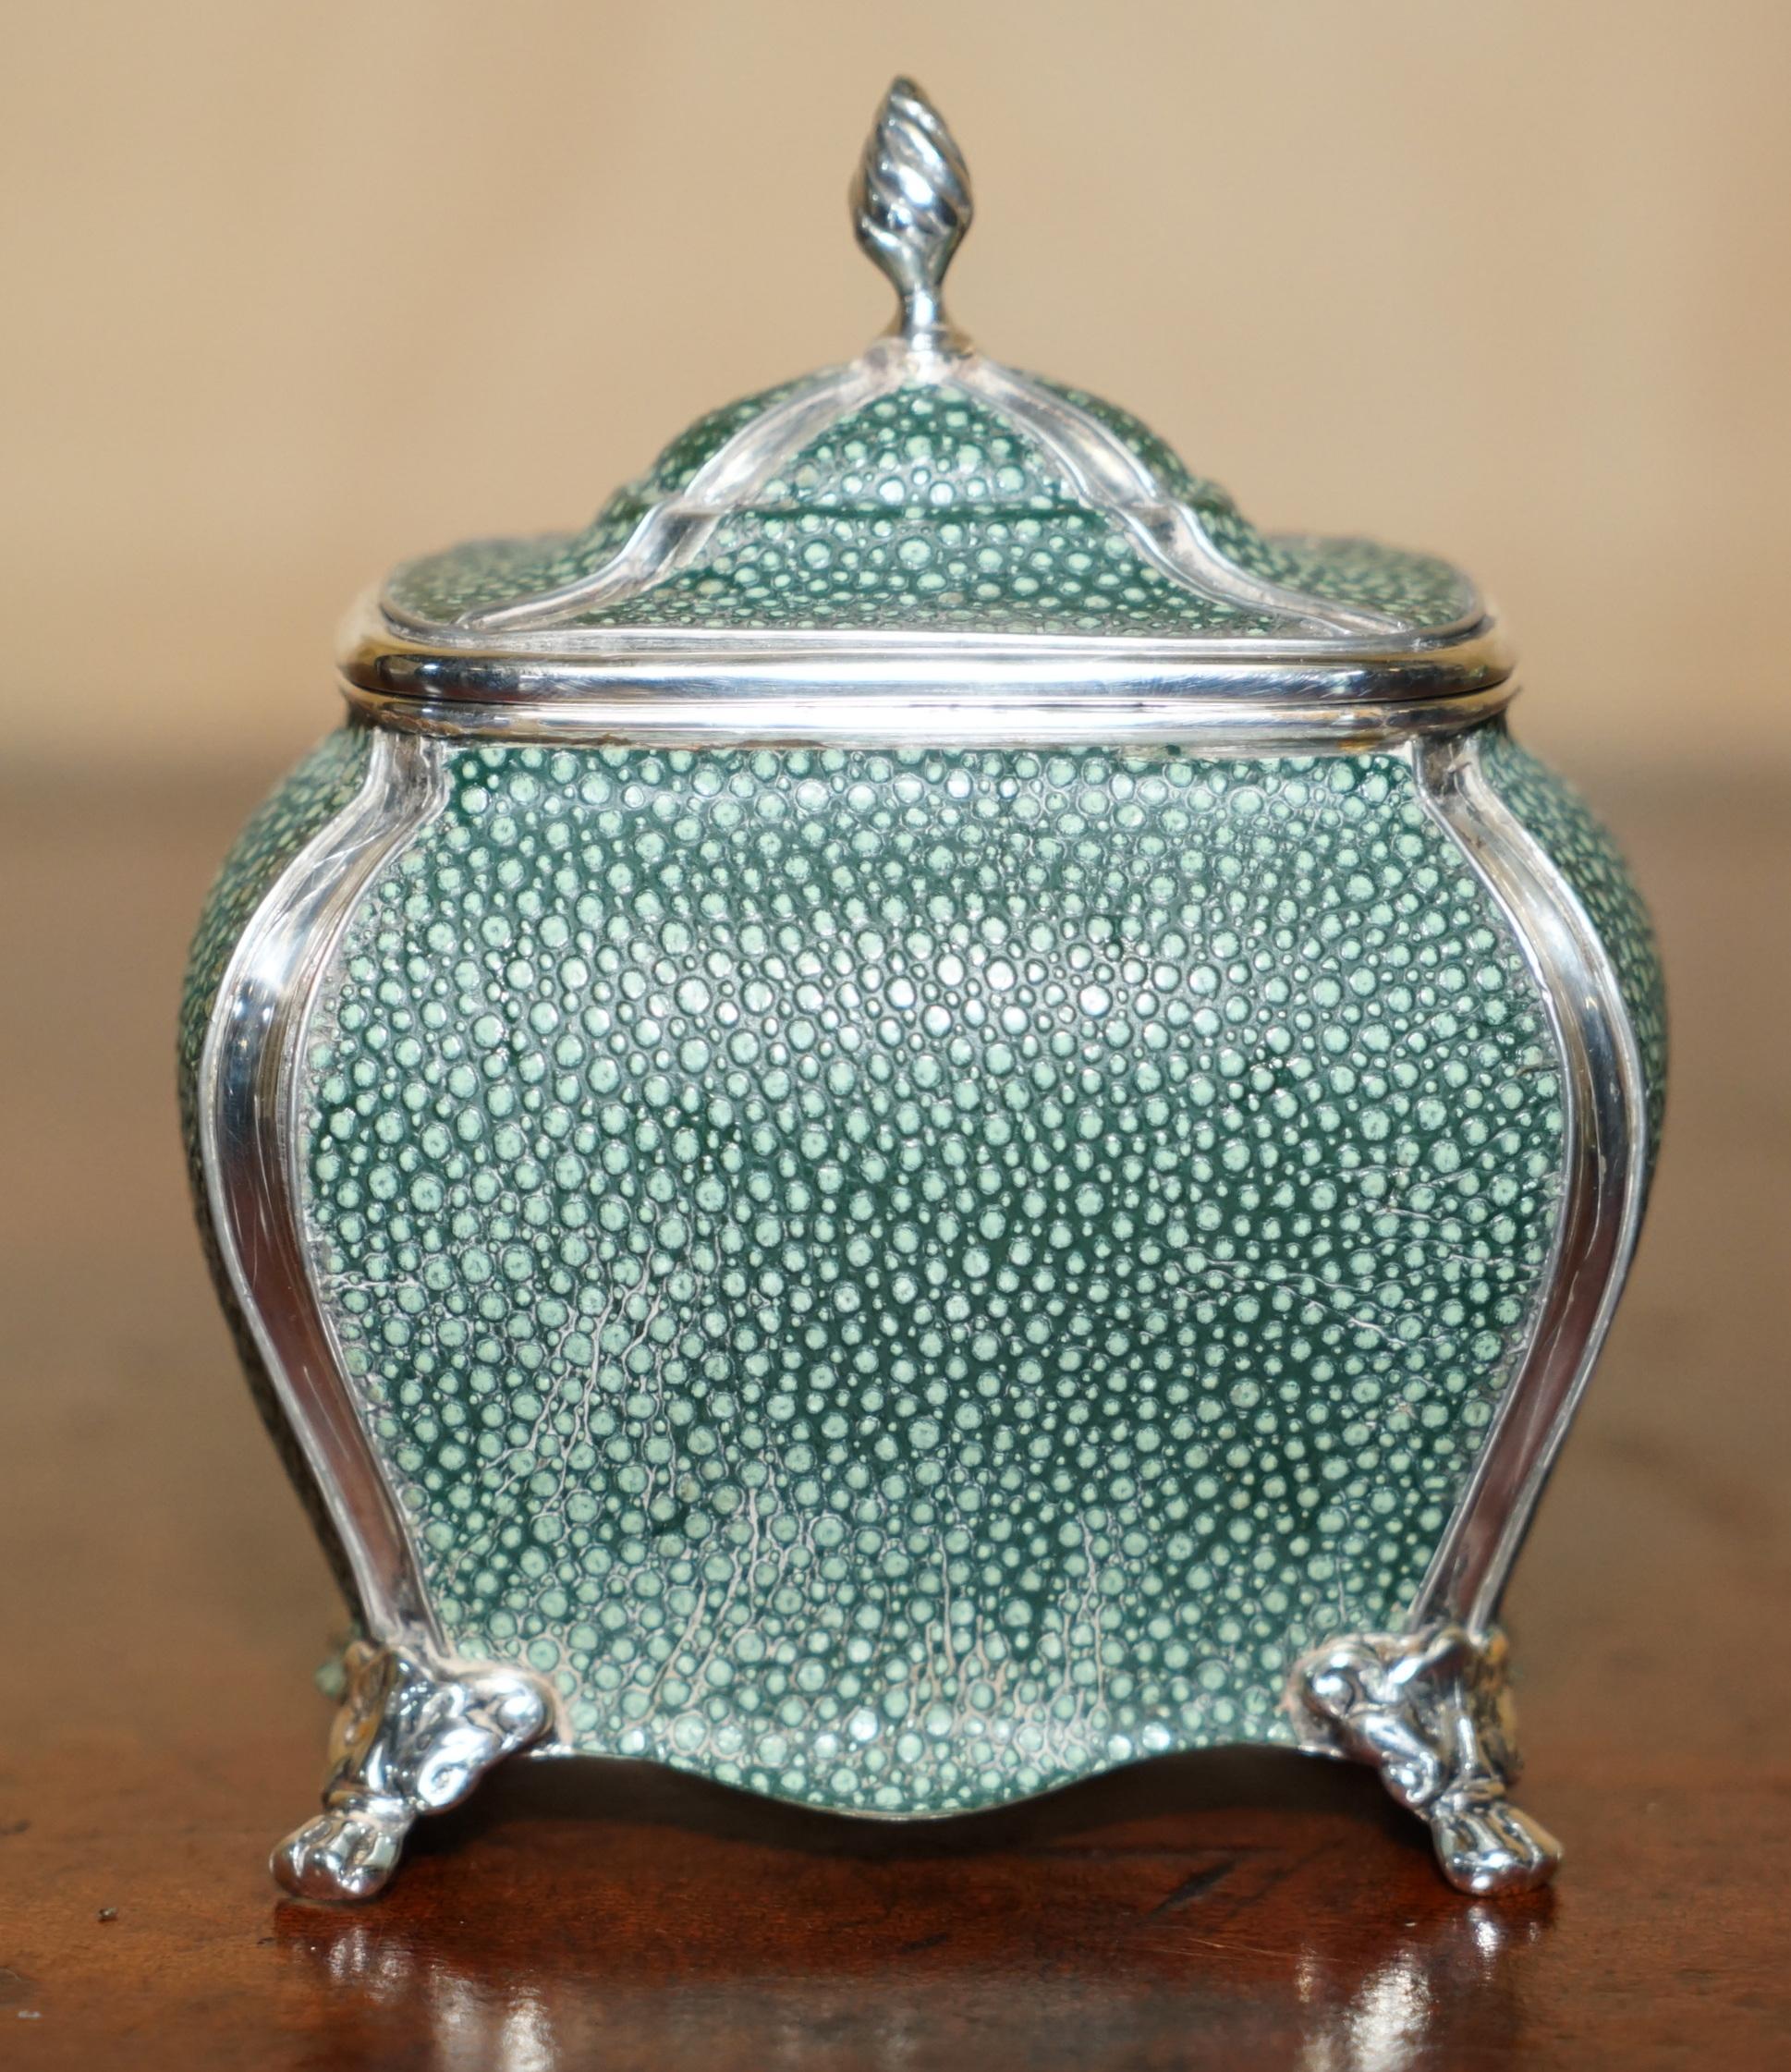 Royal House Antiques

Royal House Antiques is delighted to offer for sale this absolutely stunning Victorian circa 1890-1895 Nathan & Hayes EPNS Silver Shagreen Tea Caddy

A very good looking well made an decorative little tea pot that is by the